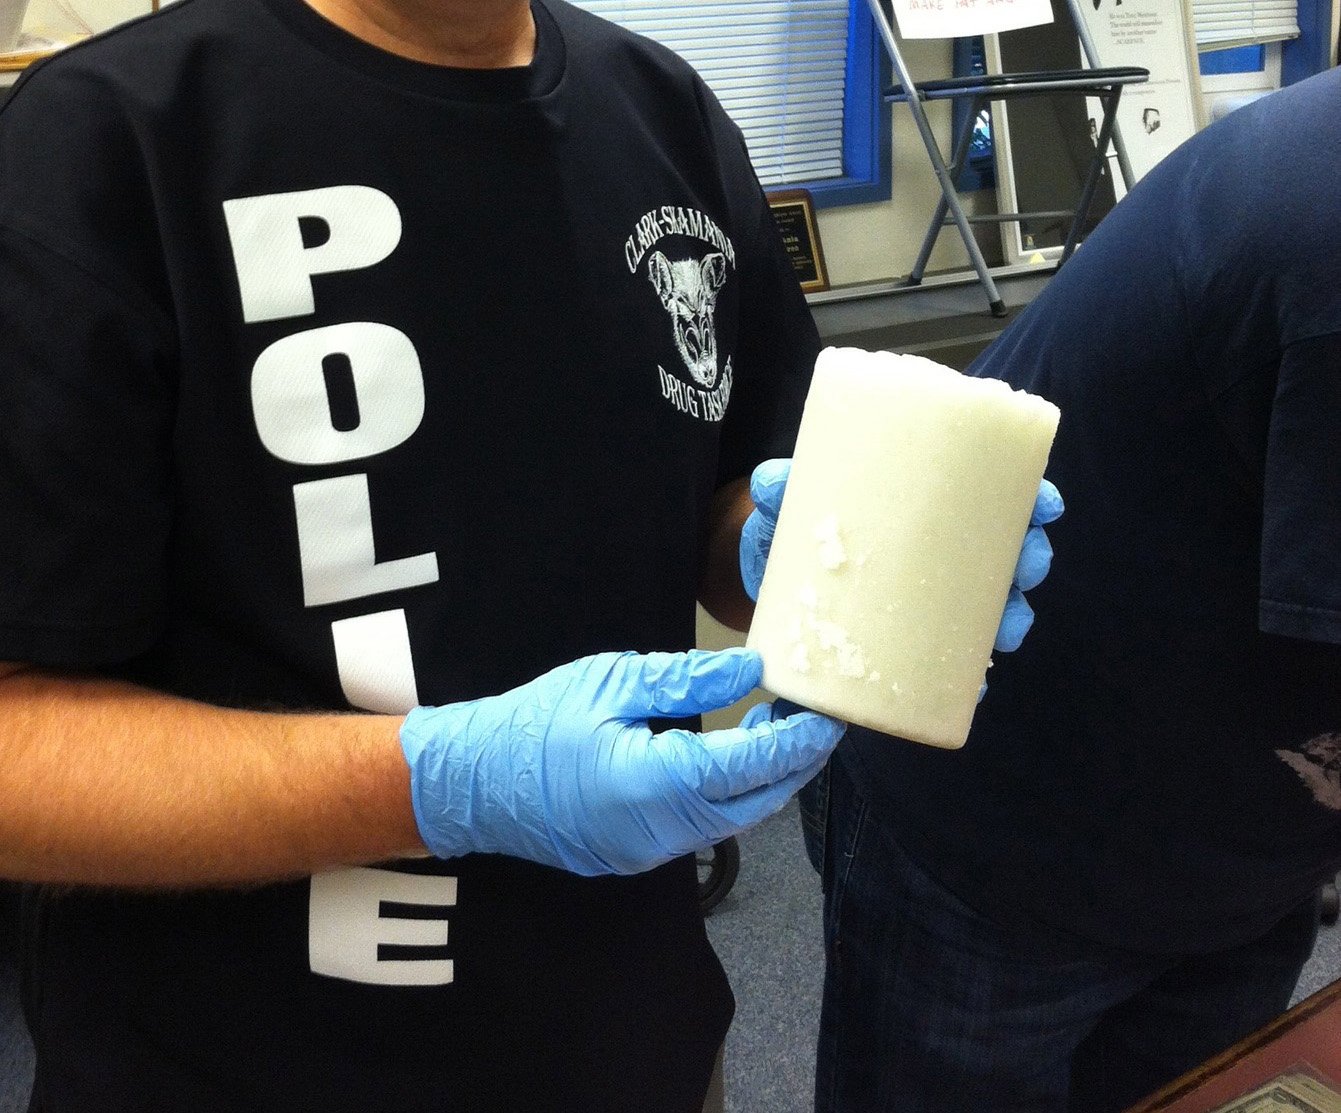 During a Thursday drug raid, police seized a thermos filled with liquid methamphetamine.